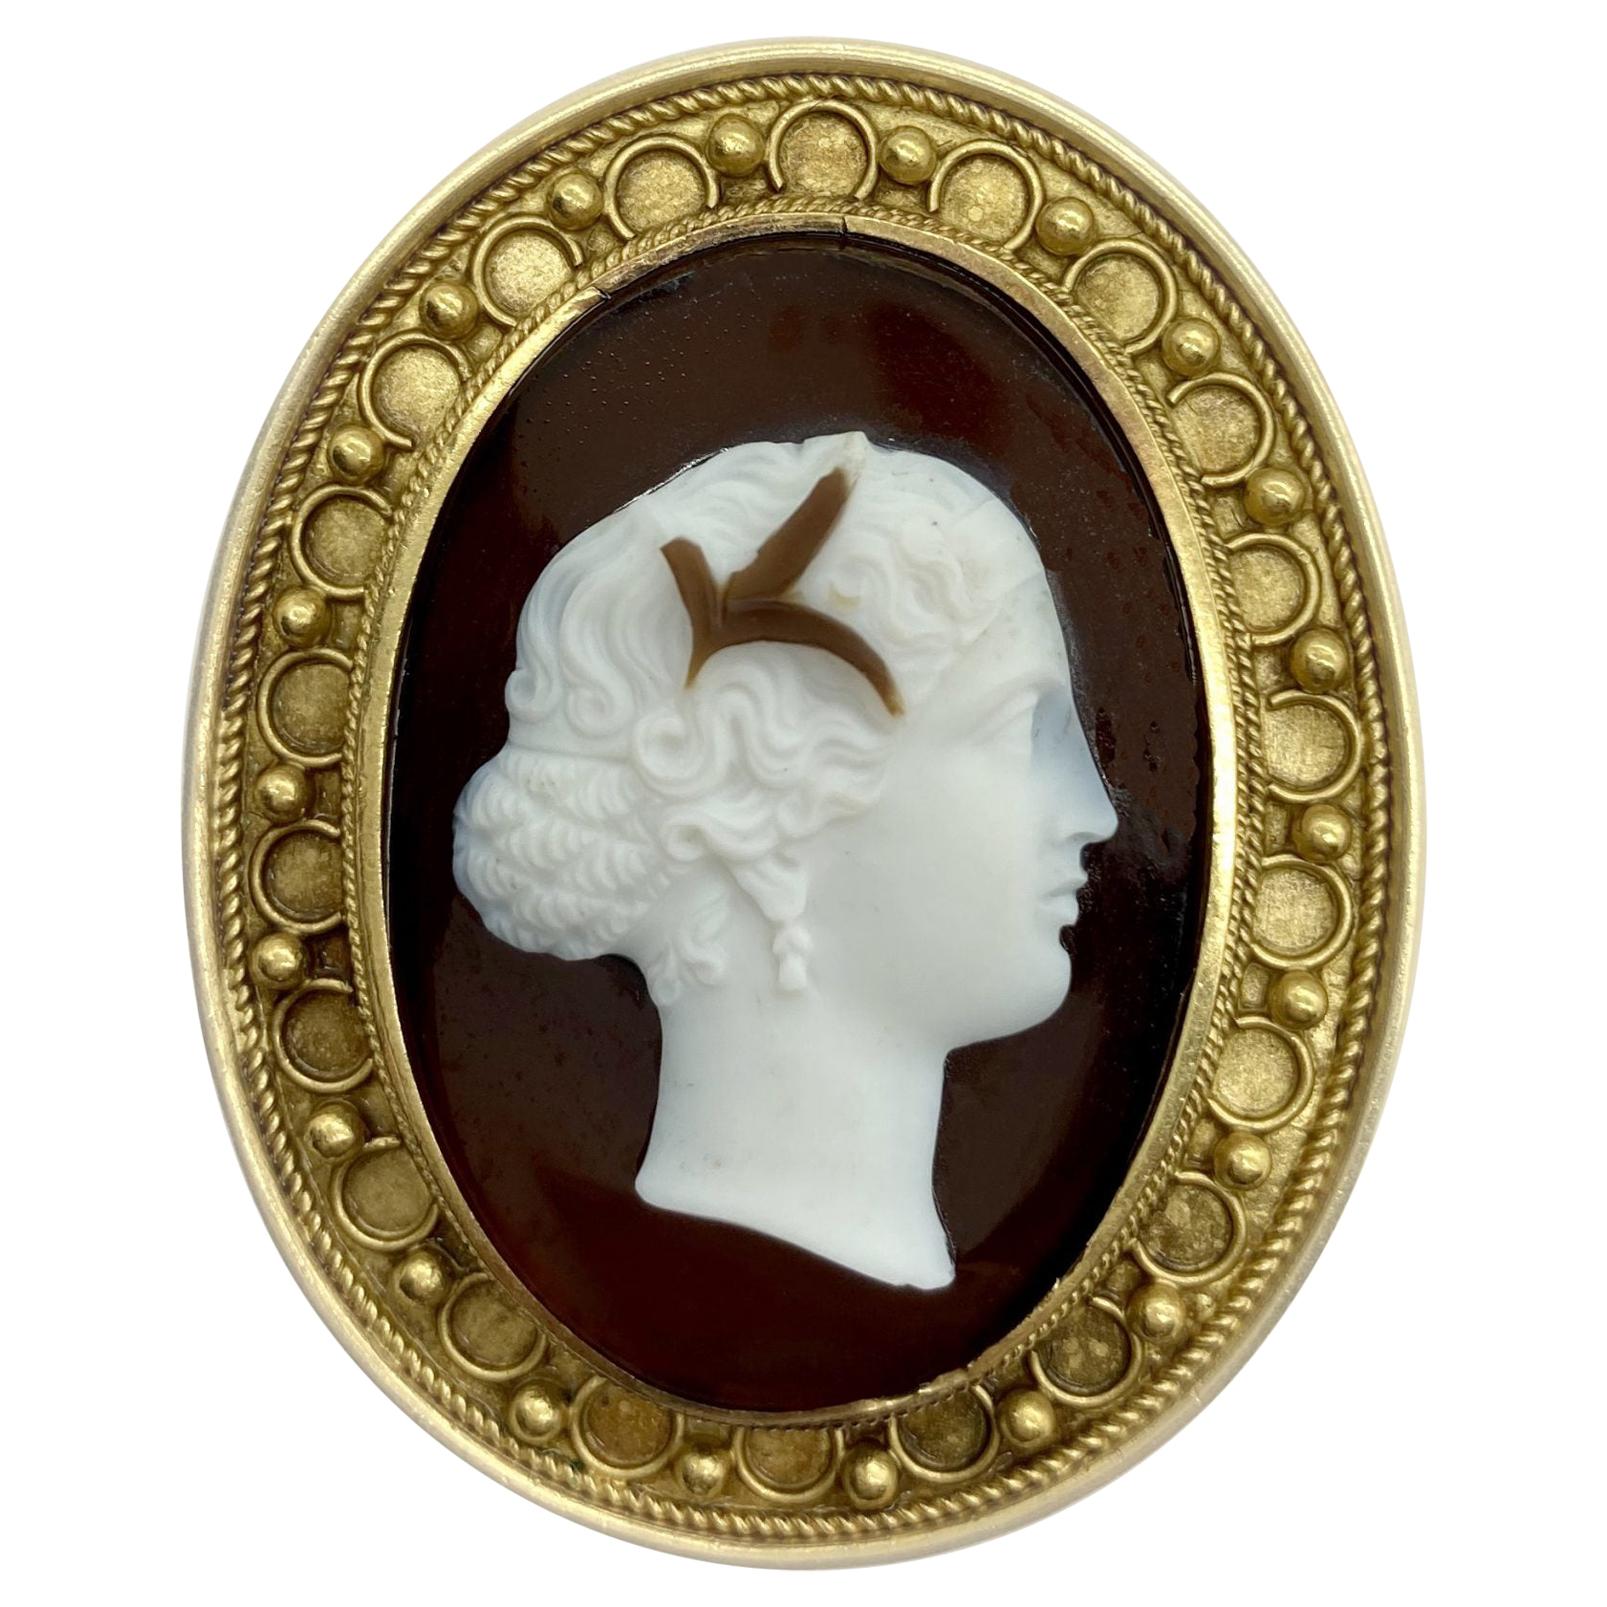 Etruscan Revival Cameo Brooch Pendant For Sale